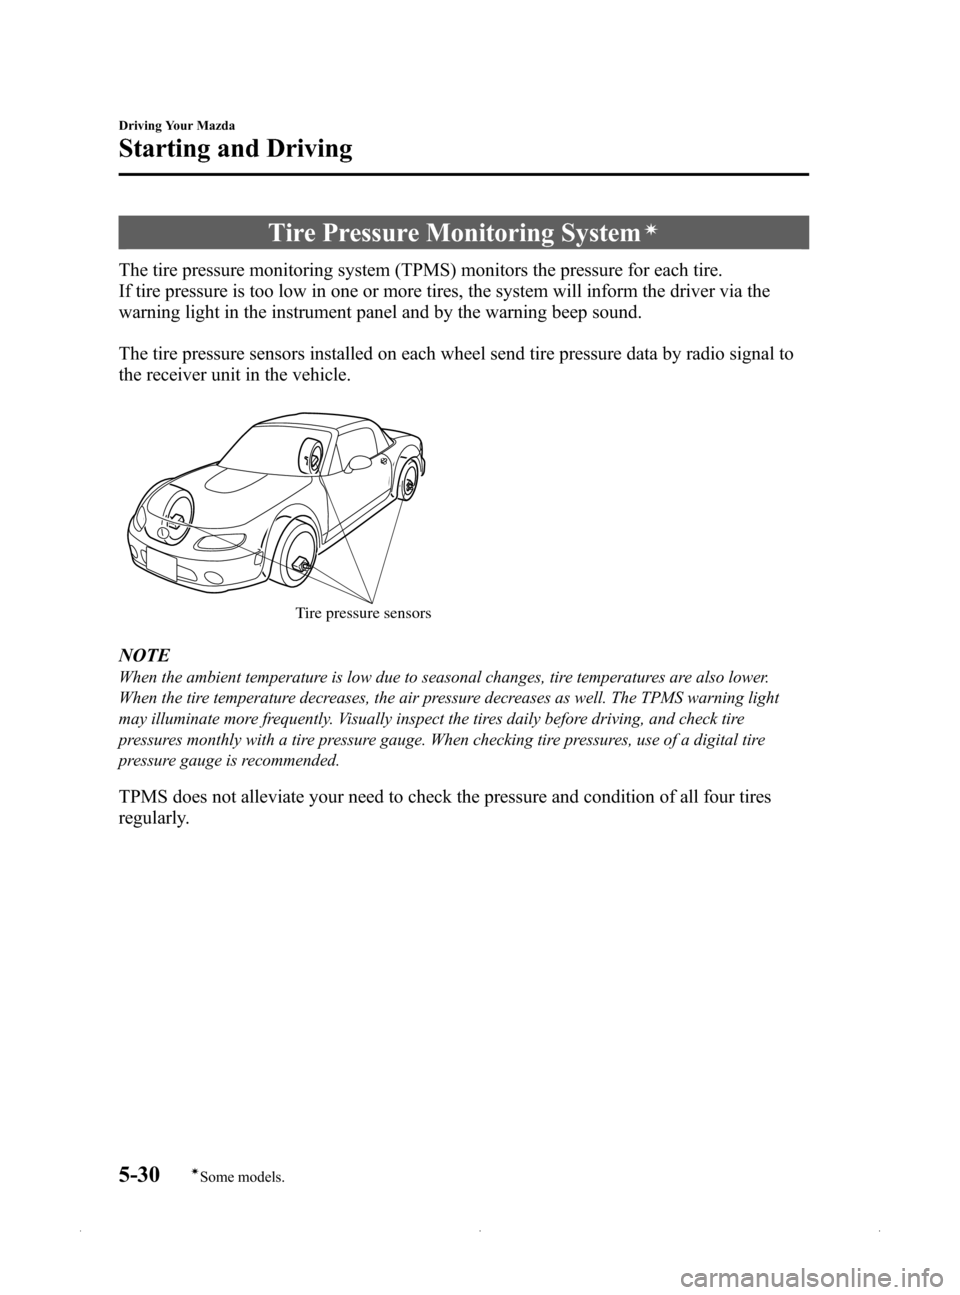 MAZDA MODEL MX-5 PRHT 2015  Owners Manual (in English) Black plate (174,1)
Tire Pressure Monitoring Systemí
The tire pressure monitoring system (TPMS) monitors the pressure for each tire.
If tire pressure is too low in one or more tires, the system will 